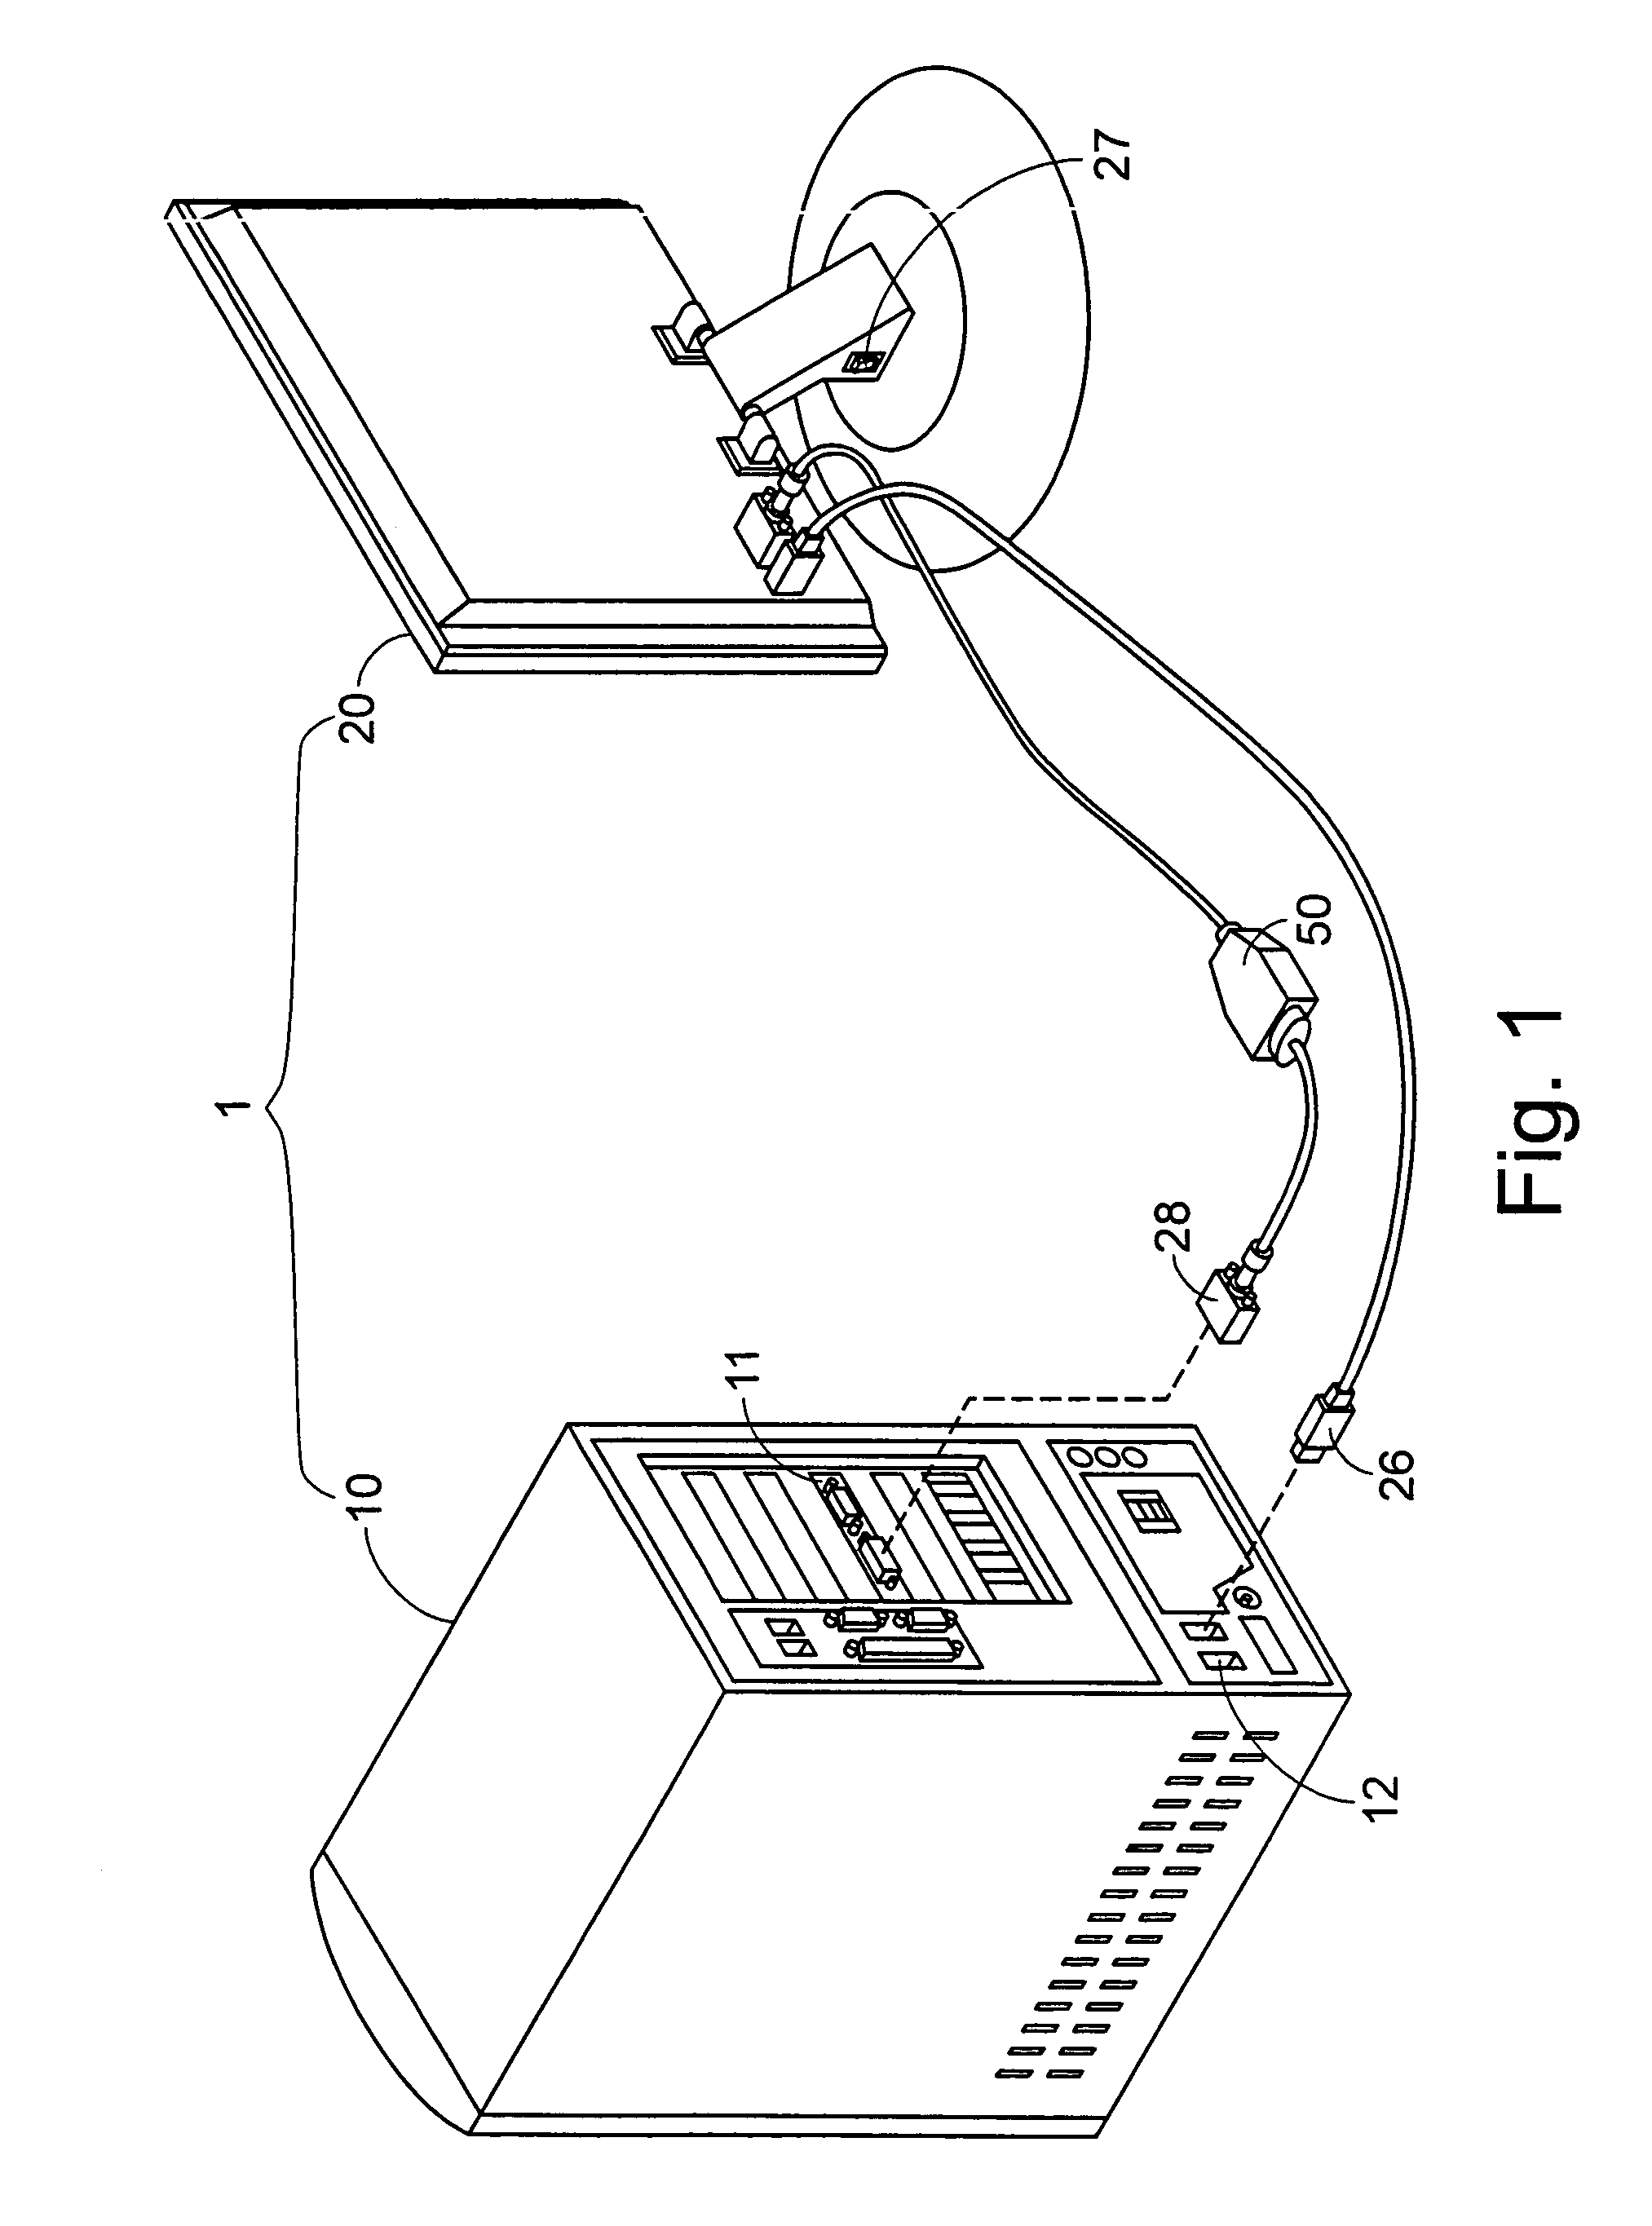 Monitor and method for controlling power-on and power-off of host computer